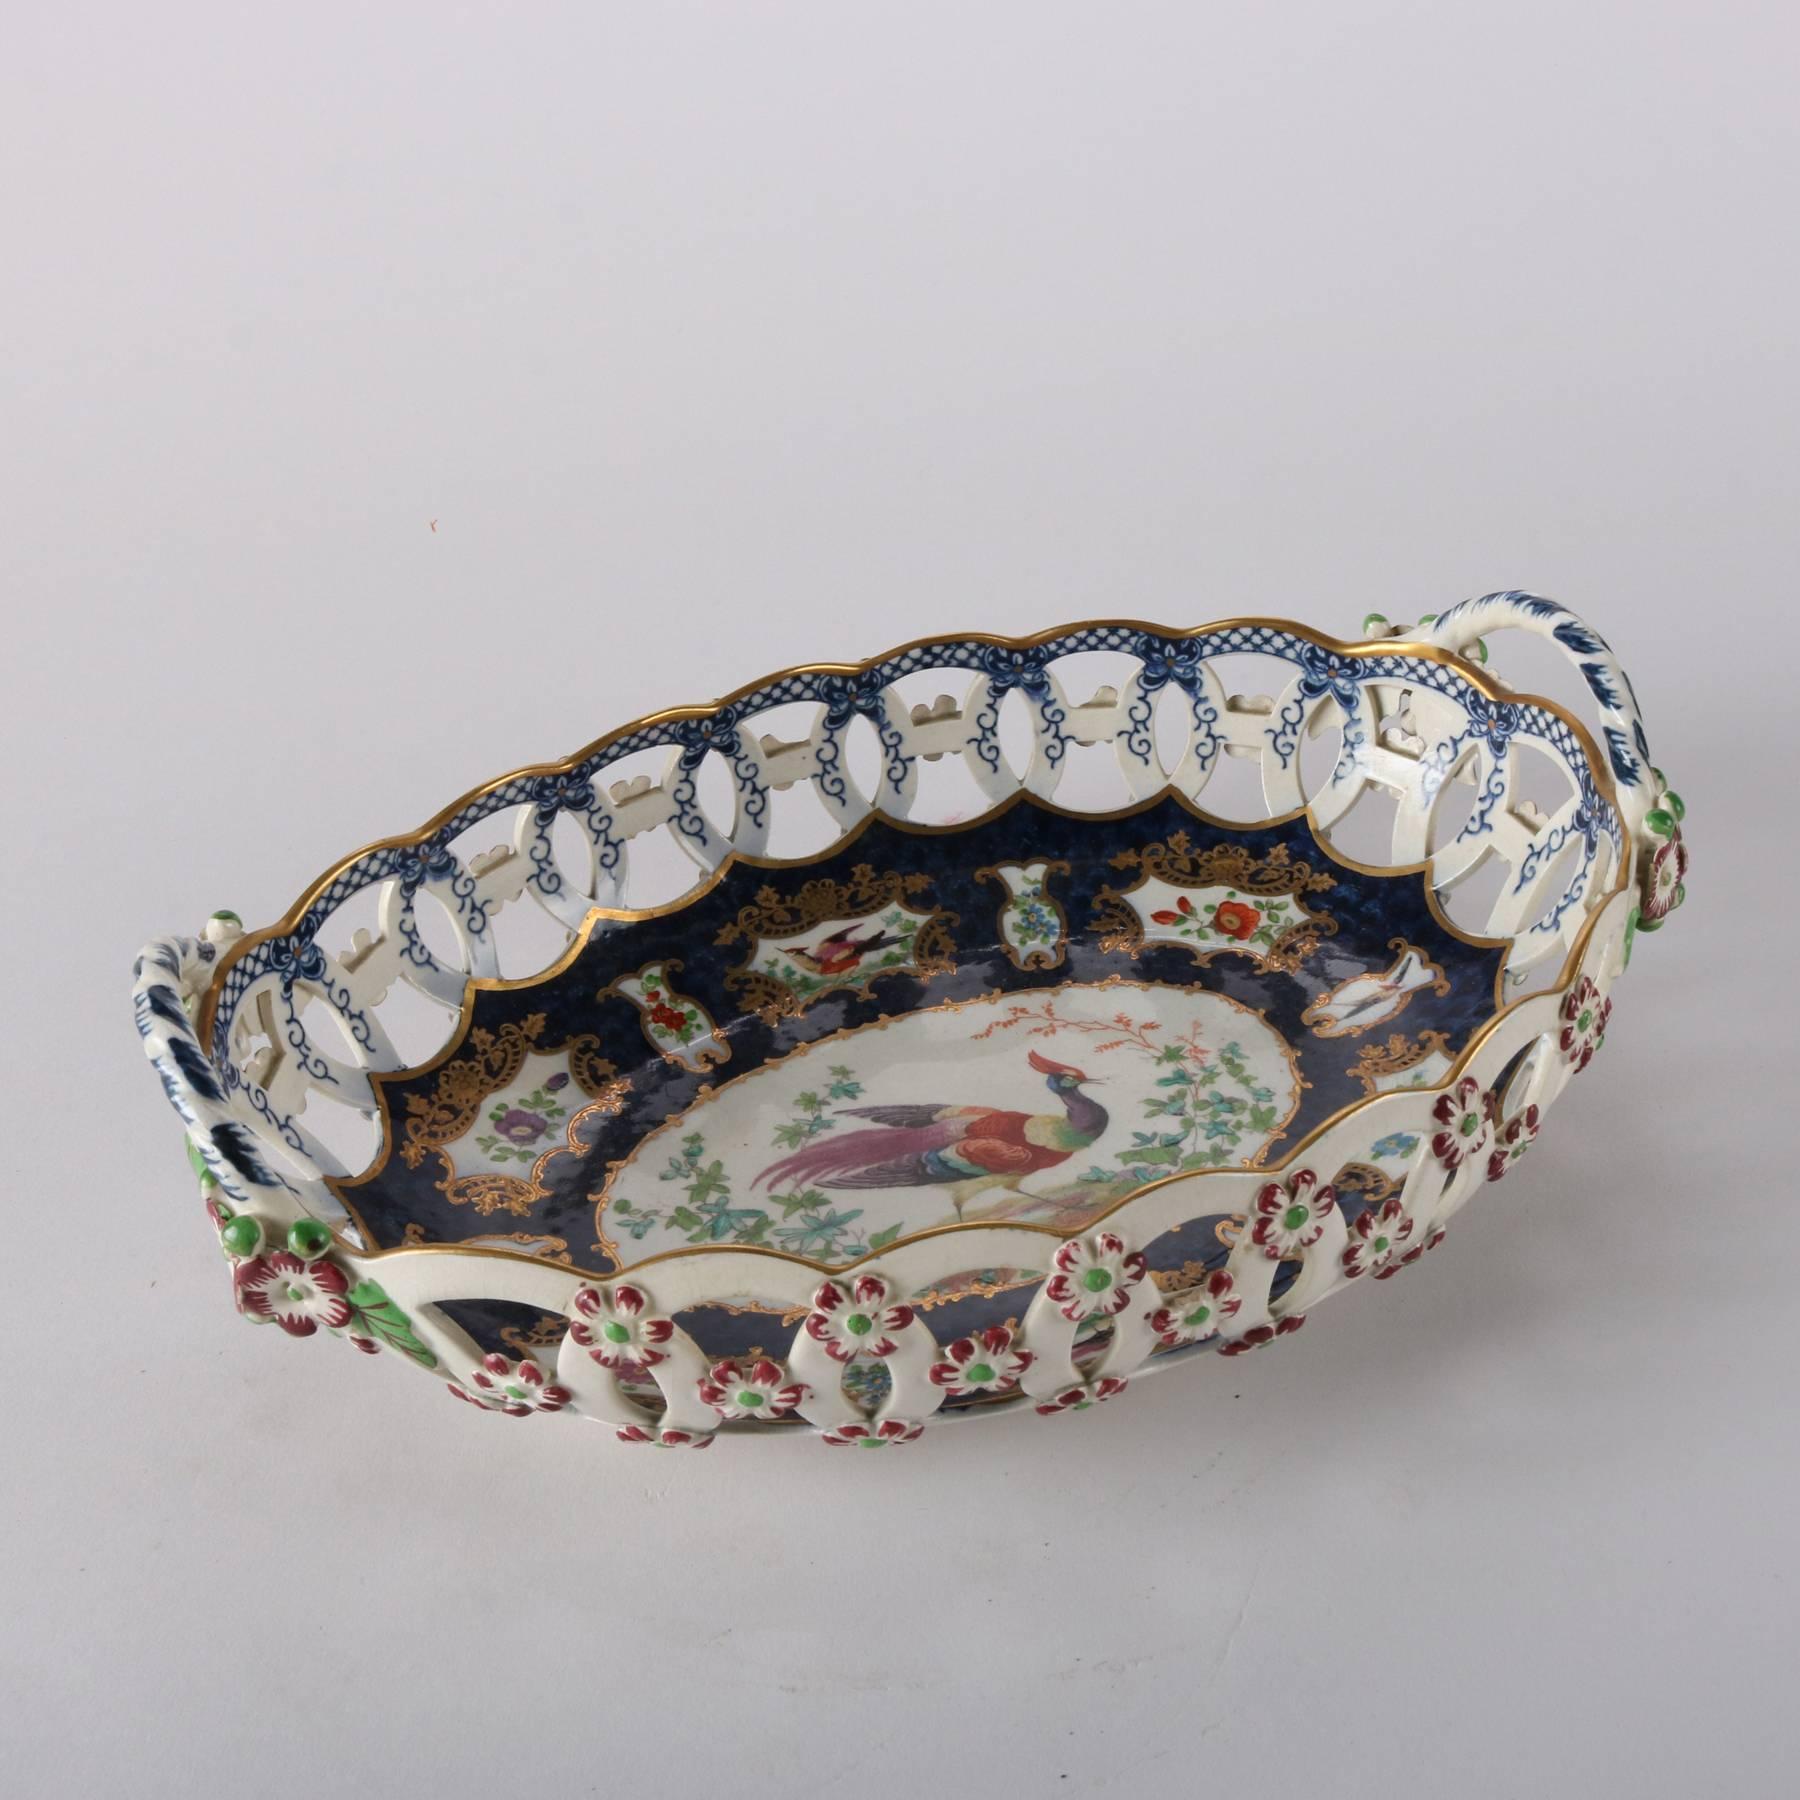 Gilt English Booths Hand-Painted Porcelain Reticulated Bread Bowl, 19th Century